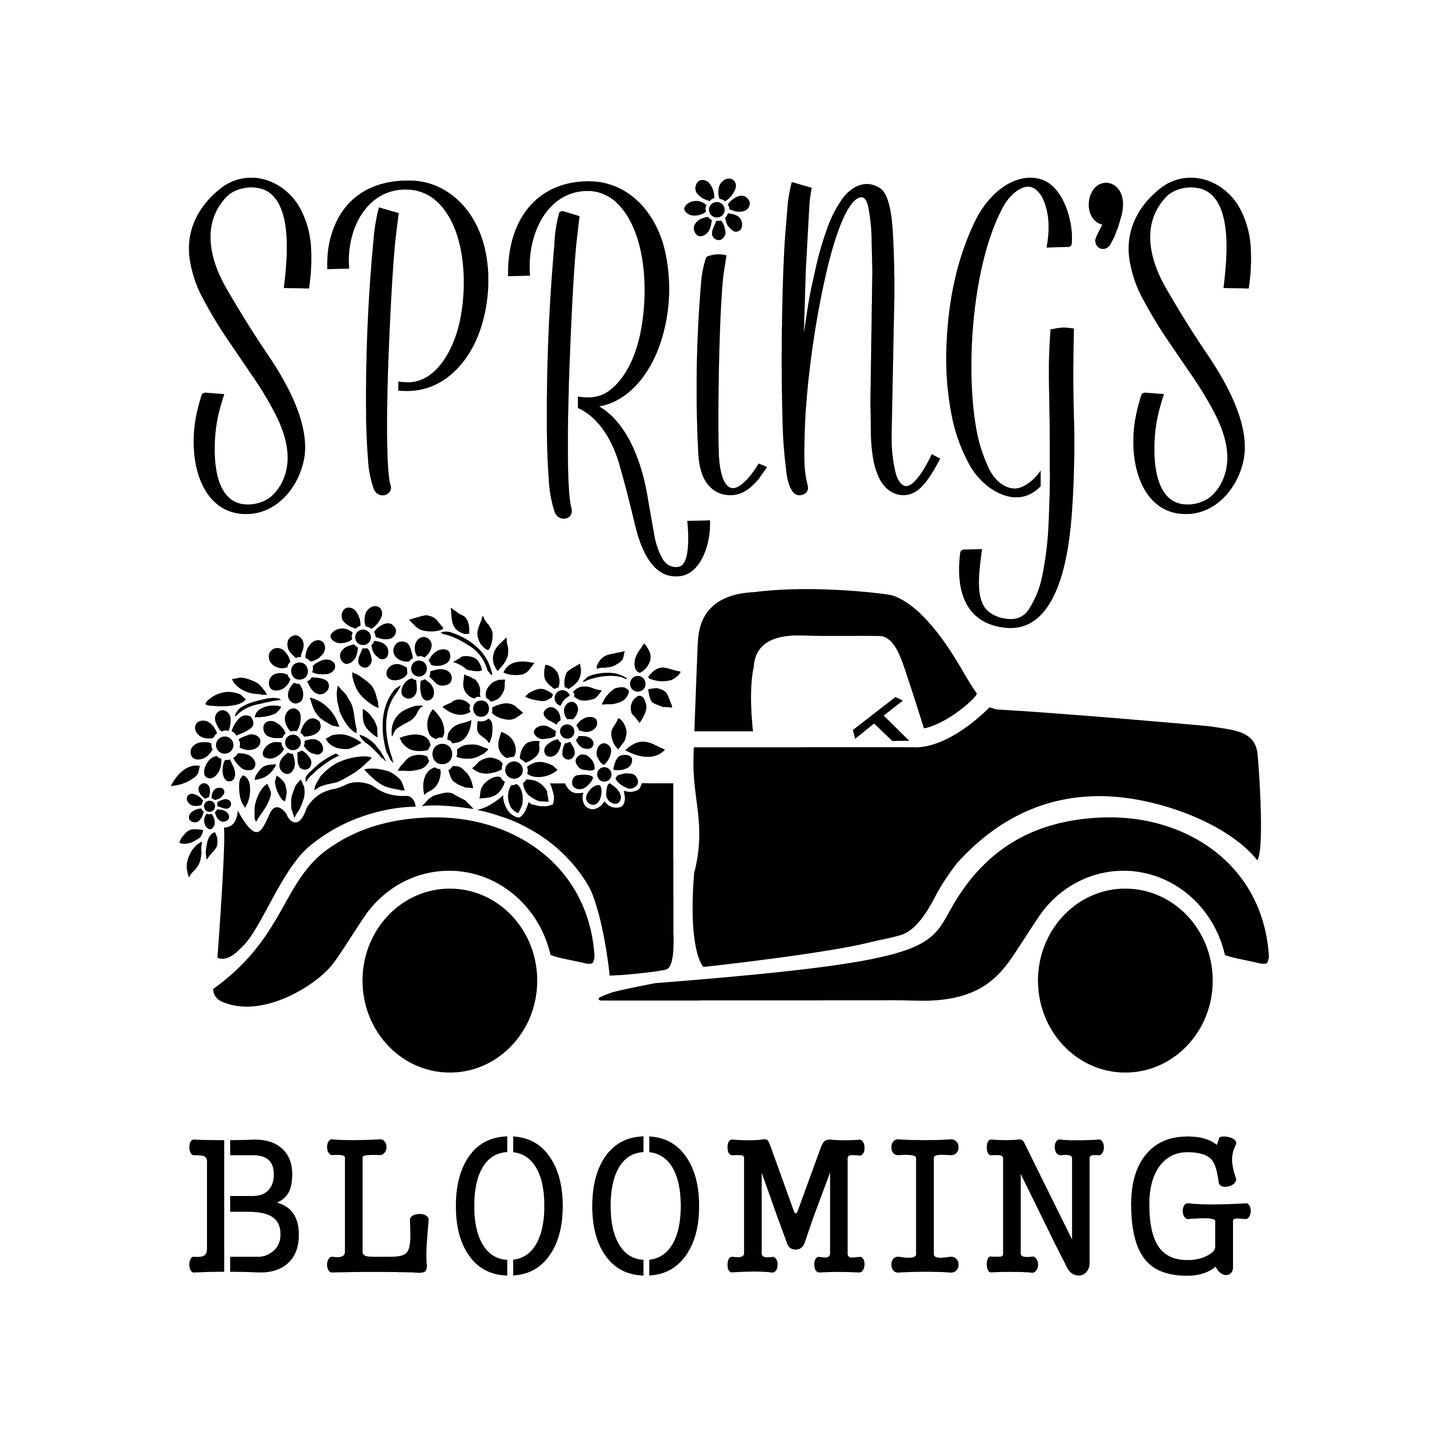 Spring&#x27;s Blooming Vintage Truck &#x26; Flowers Embossing 12 x 12 Stencil | FS091 by Designer Stencils | Word &#x26; Phrase Stencils | Reusable Stencils for Painting on Wood, Wall, Tile, Canvas, Paper, Fabric, Furniture, Floor | Stencil for Home Makeover